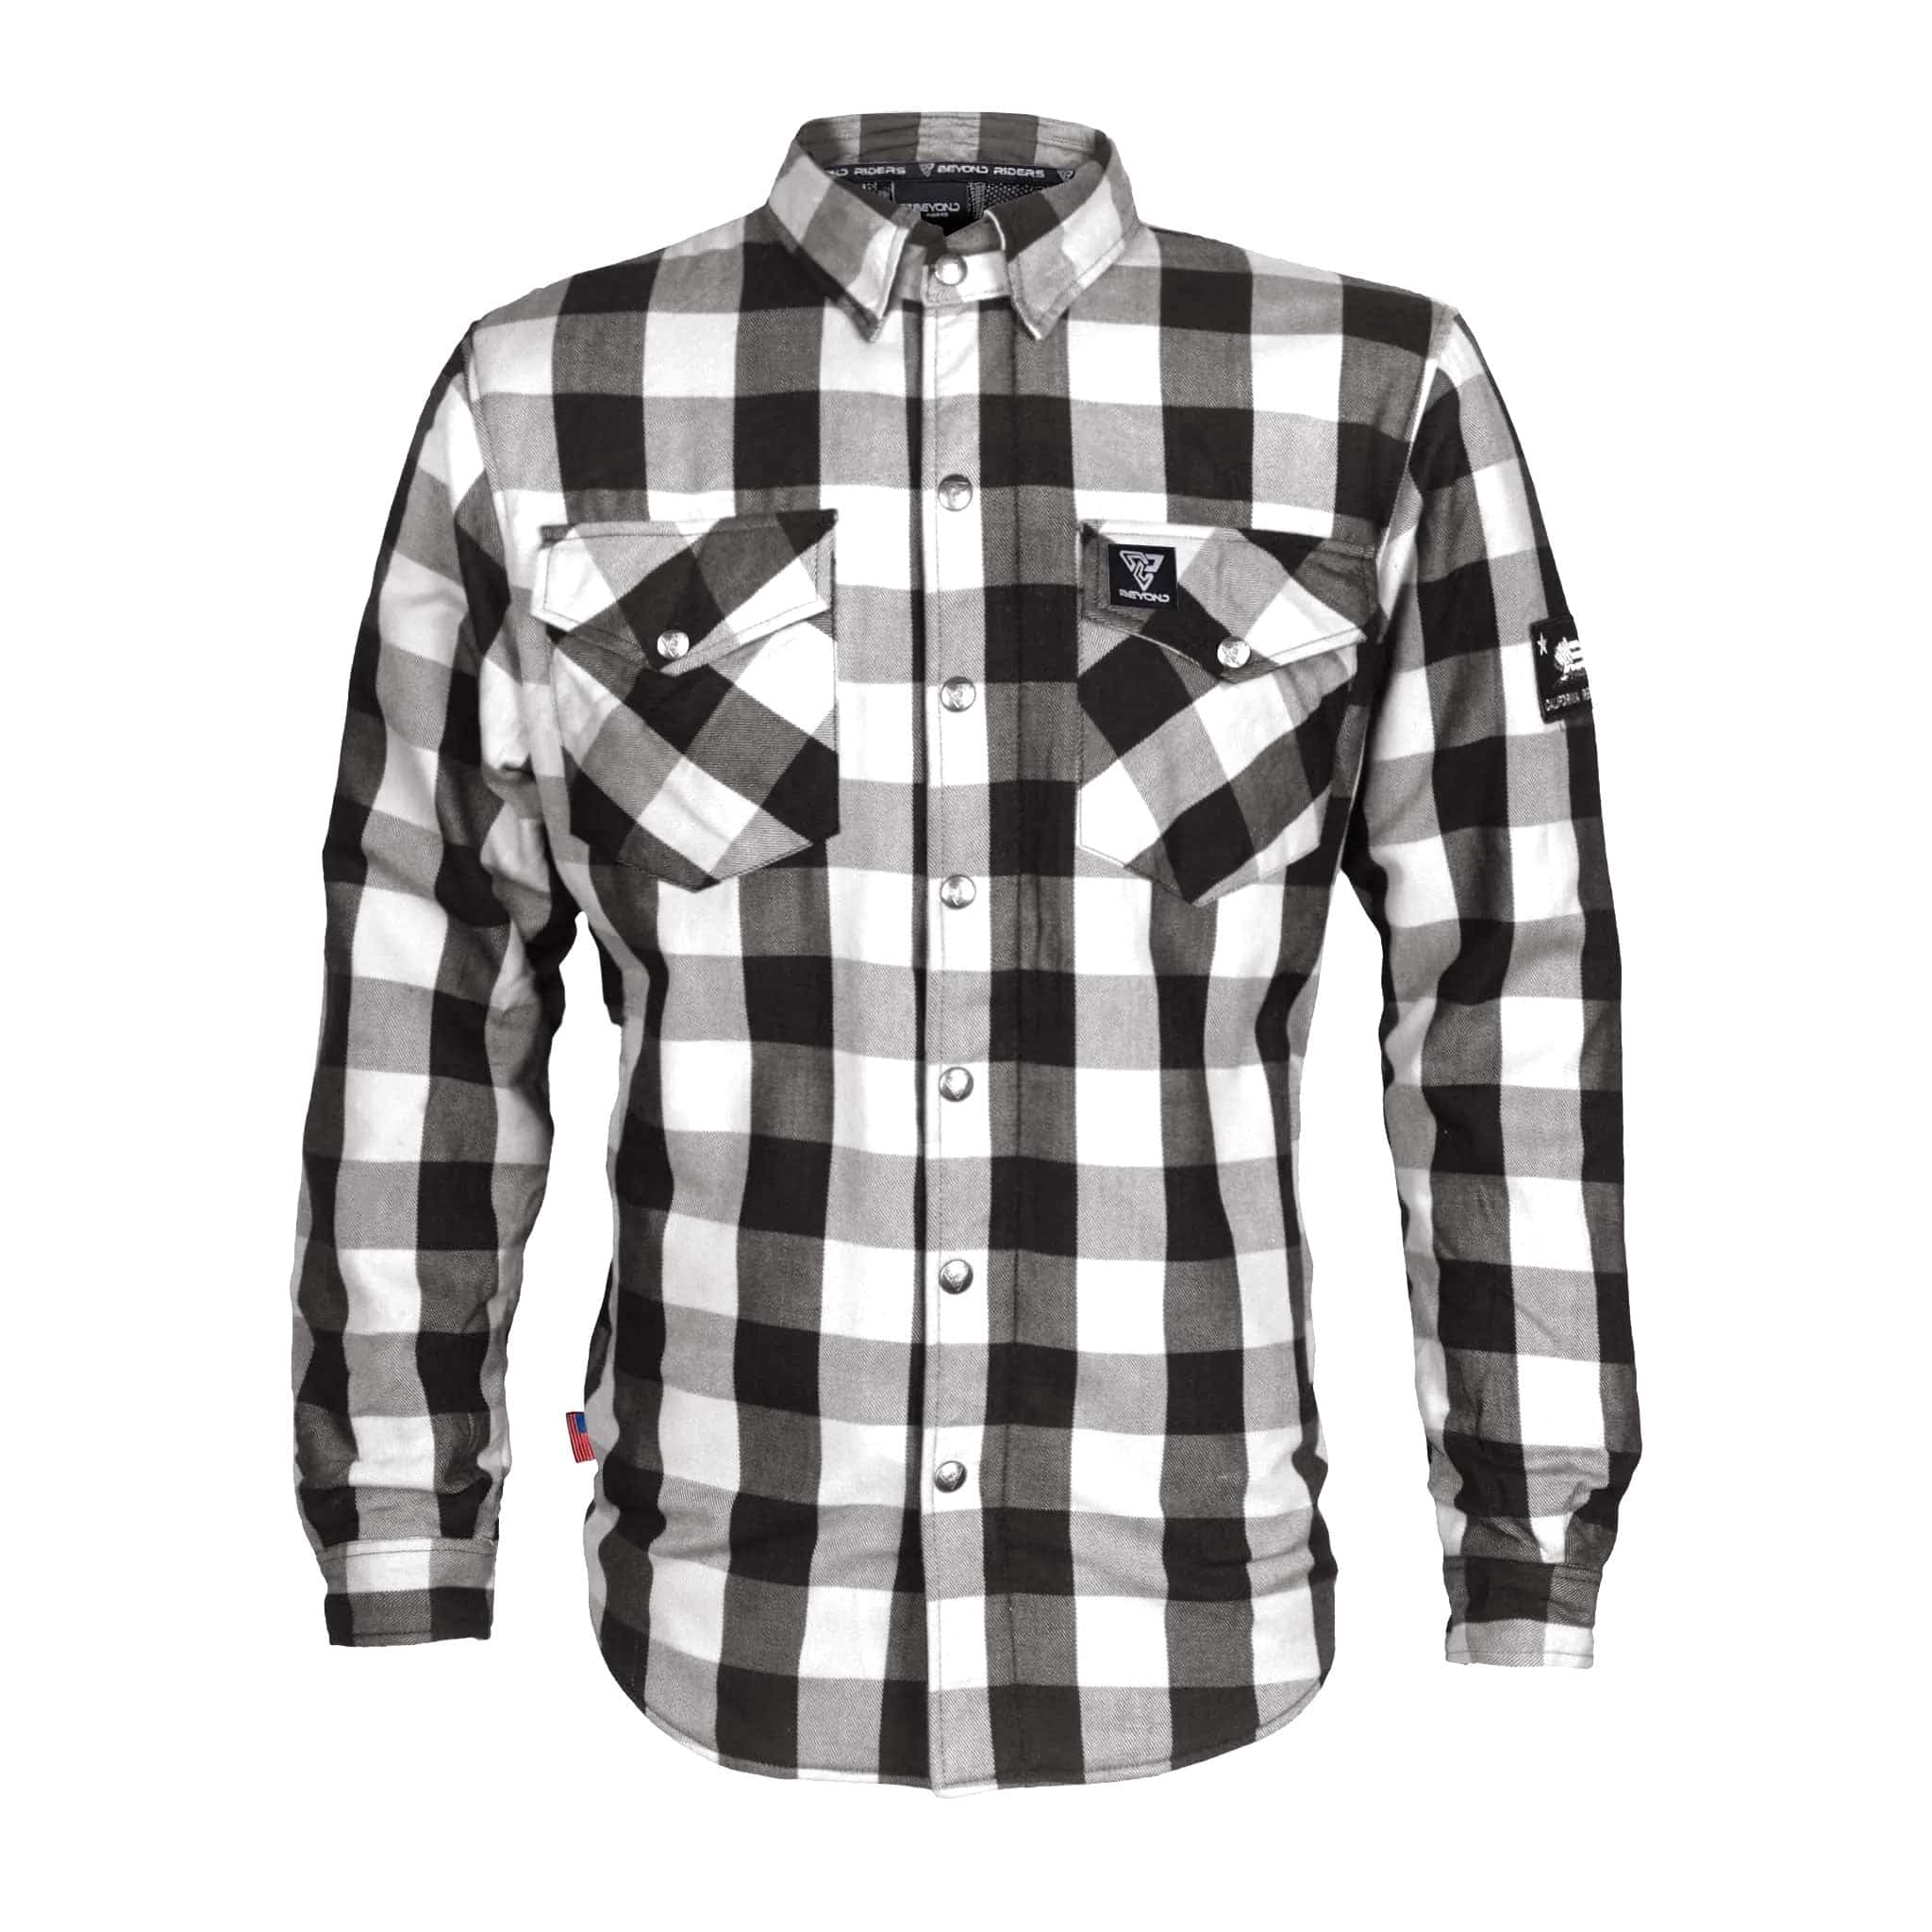 Protective Flannel Shirt - "Midnight Ride" - Black and White Checkered